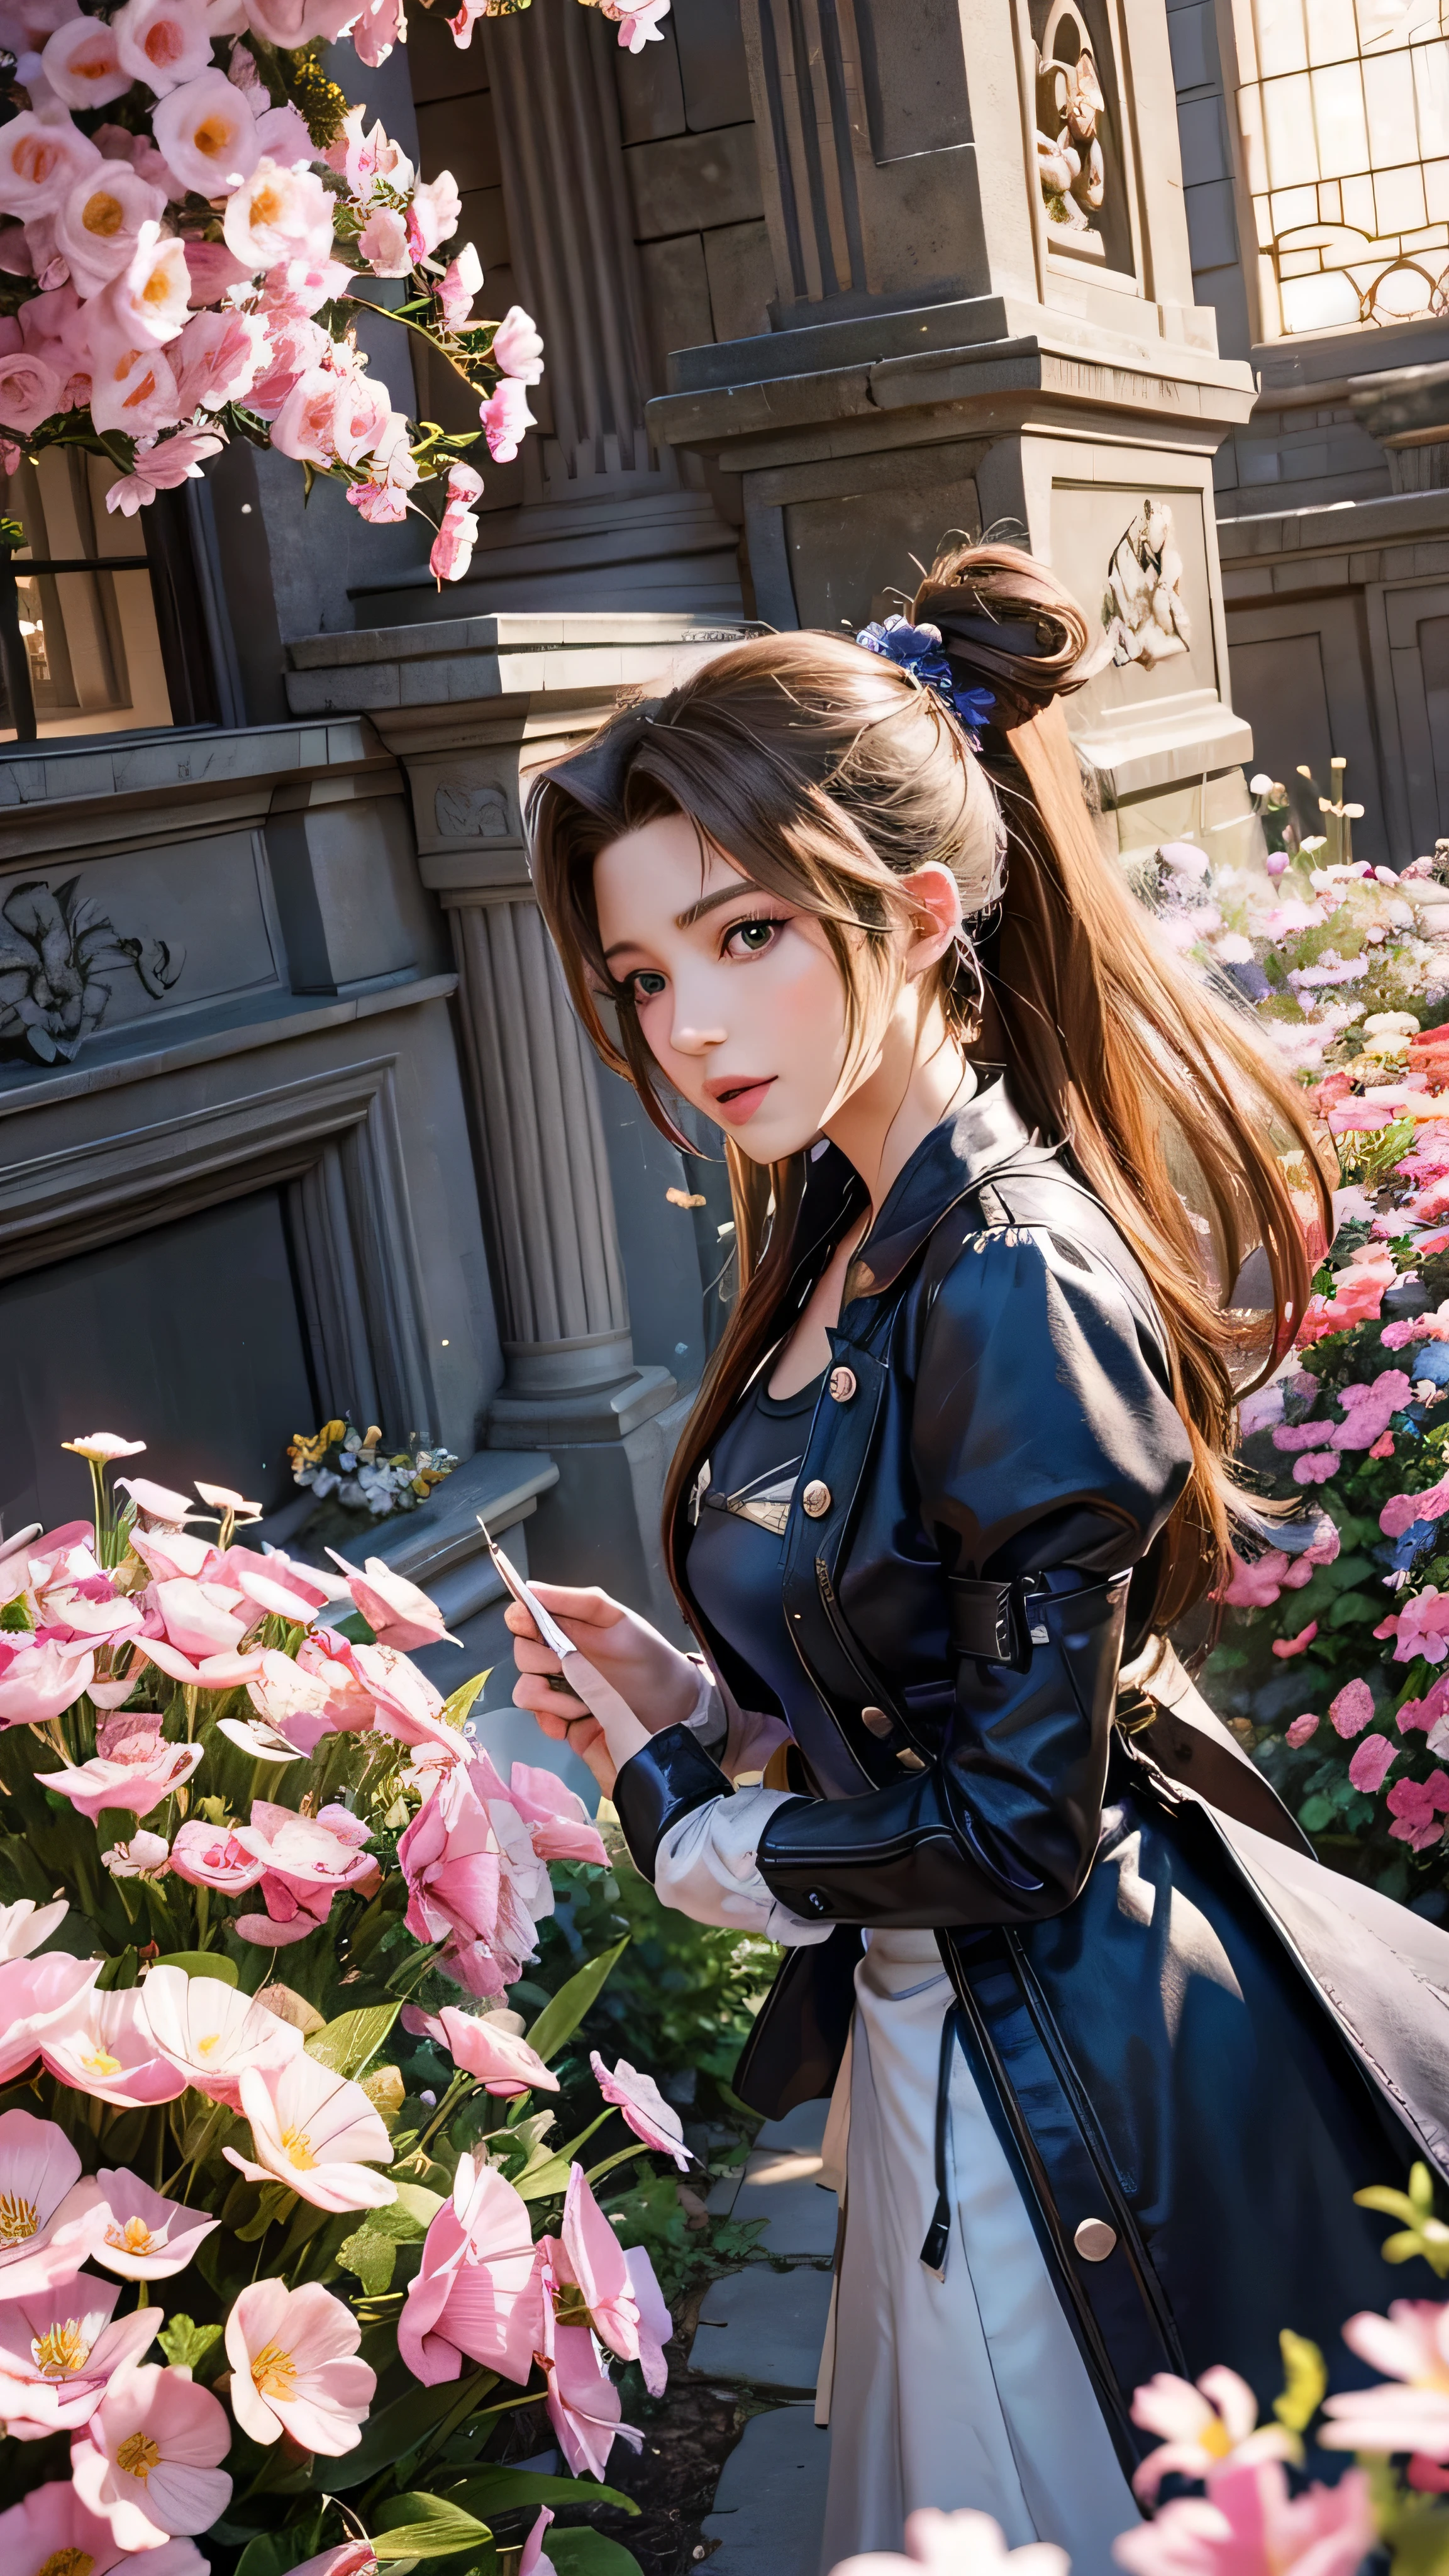 Popular Games「Final Fantasy VII」Characters、The beautiful leading lady Aerith Gainsborough is particularly graceful in some breathtaking scenes.。Illustration quality 1.This masterpiece, Teeth, is number one、Colorful flower fields in the background。Panorama Shot(1.4)teeth、CG Unity 8K wallpapers(1.1)With impressive details comparable to、Introducing Aerith&#39;s solo figure。Intricate ink splatters and splashes of color reminiscent of watercolors fill the scene.、Adds depth and movement。